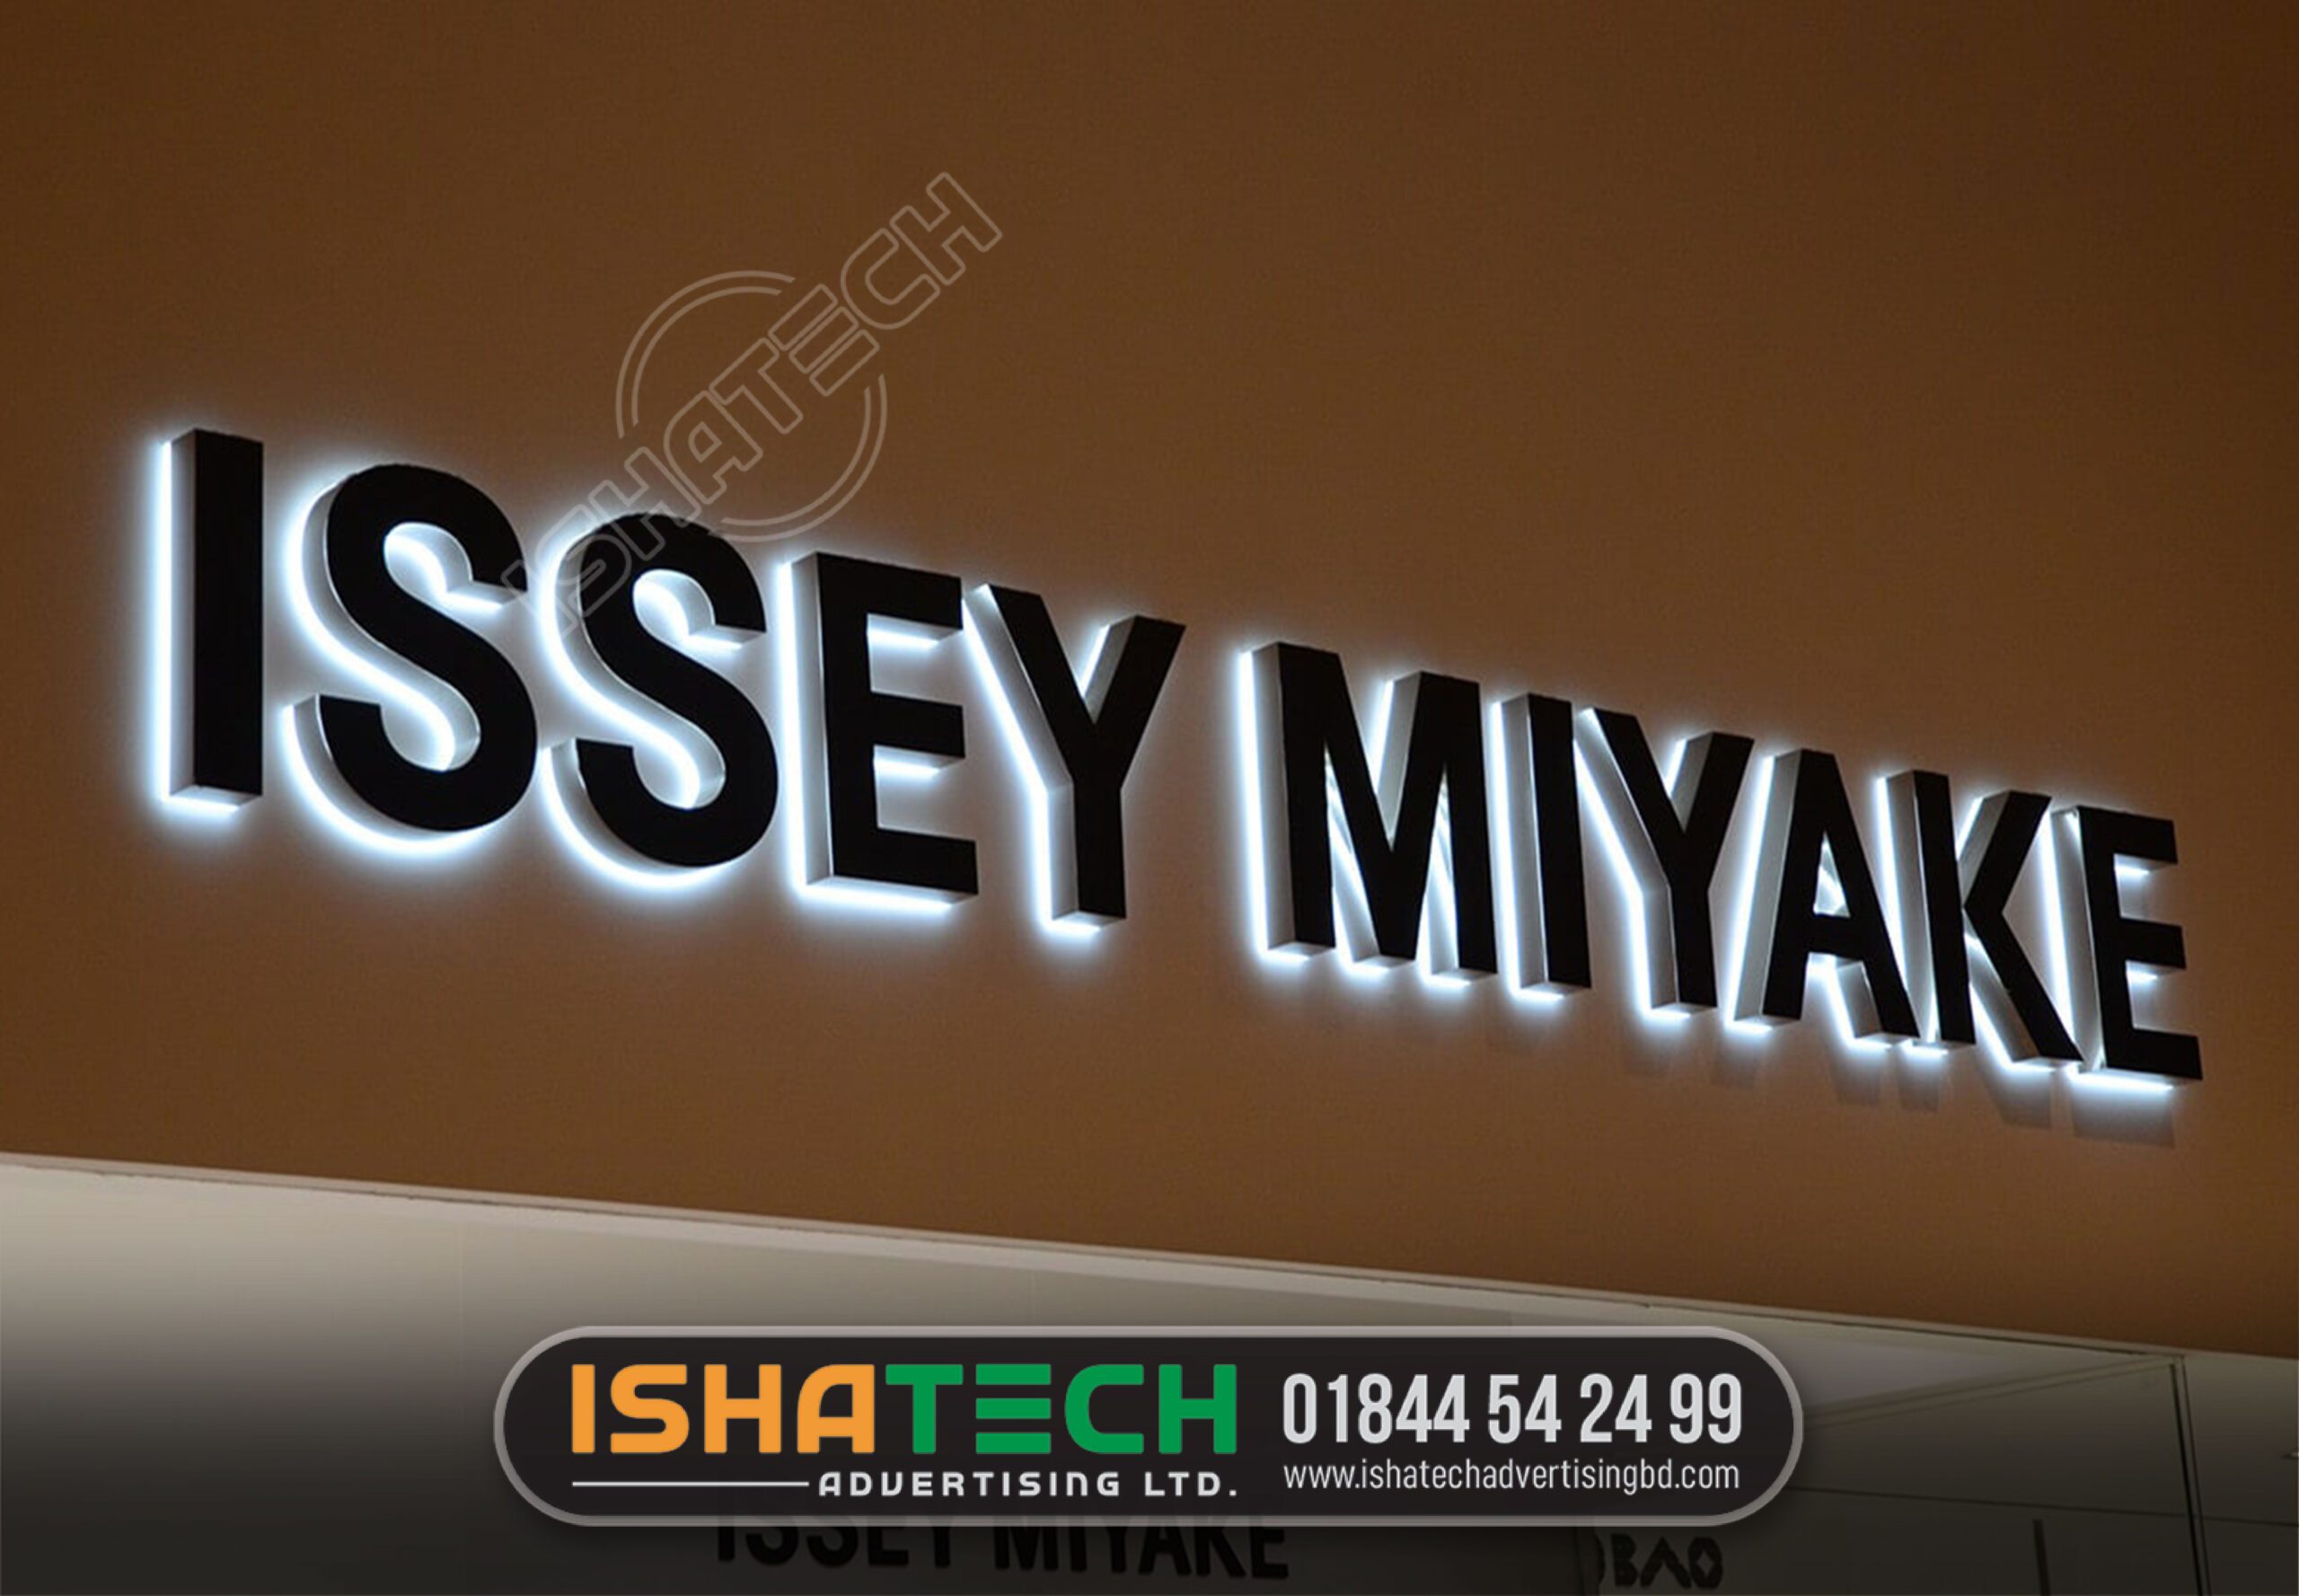 ISSEY MIYAKE BACKLIGHT ACRYLIC 3D LETTER SIGNAGE, 3D LED Backlit Signs With Powder Coated Stainless Steel, Wholesale 3d acrylic letters And Luminescent EL Products, Frontlit and Backlit Letter LED 3D Acrylic Sign